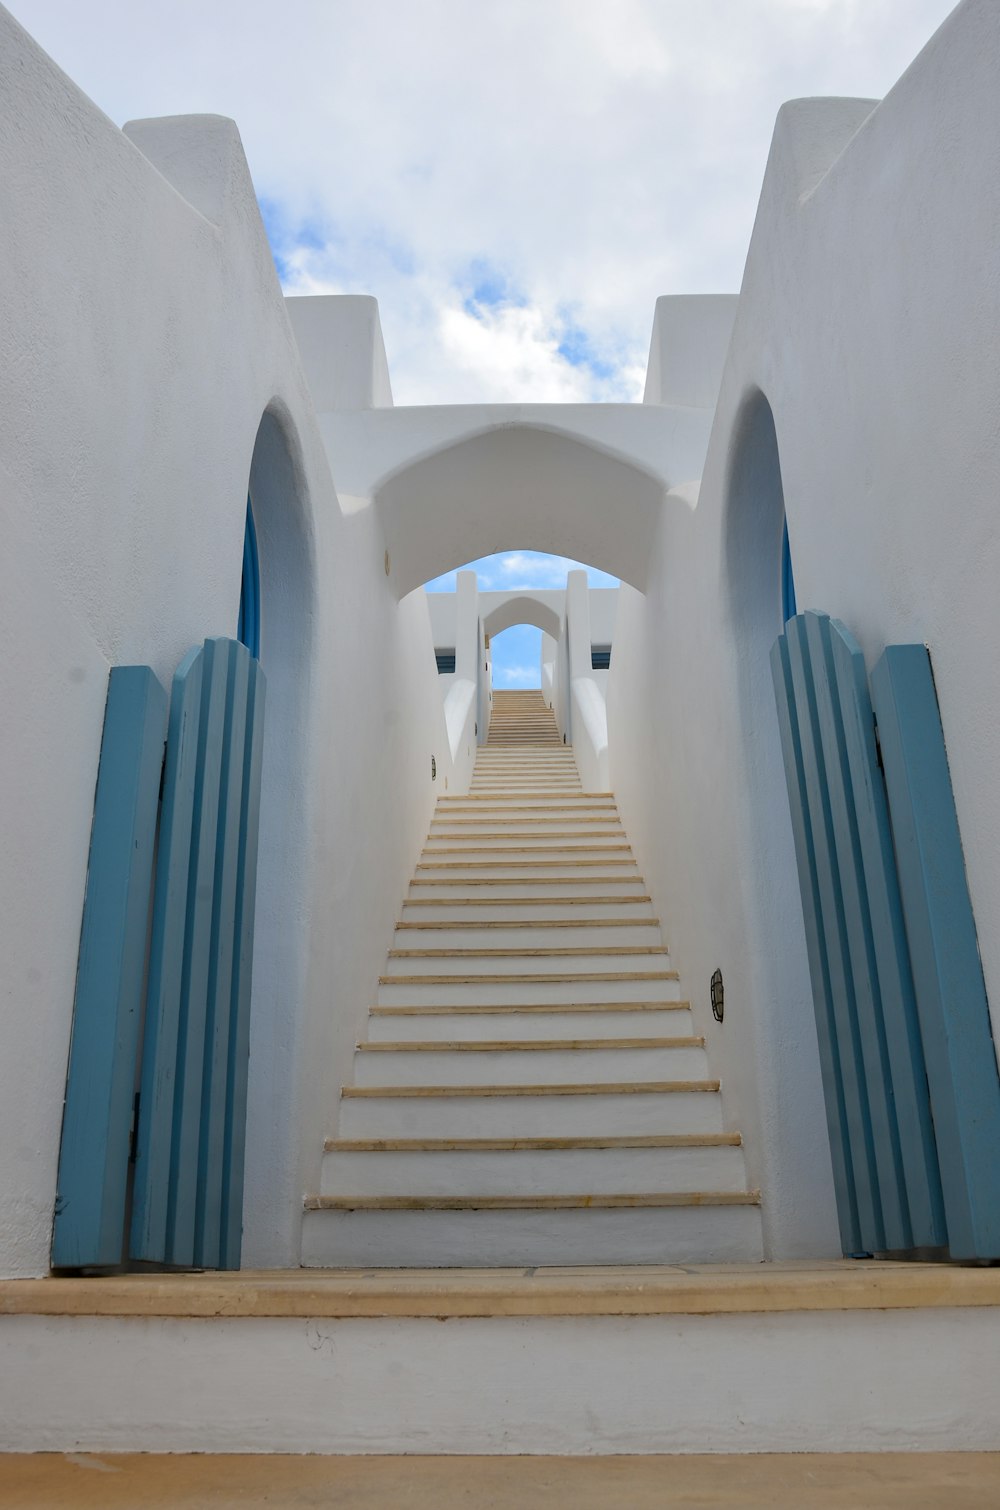 white concrete staircase under blue sky during daytime